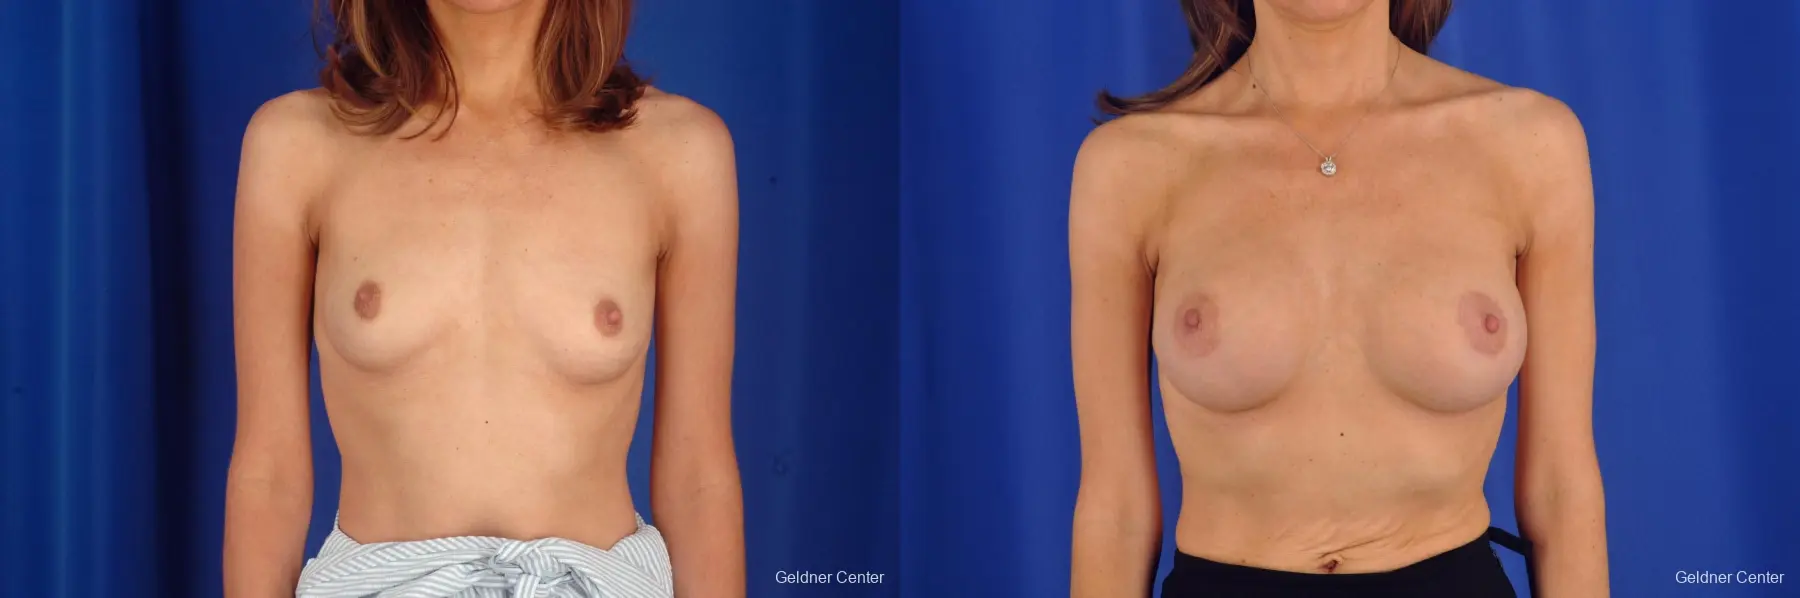 Breast Lift Chicago 2296 - Before and After